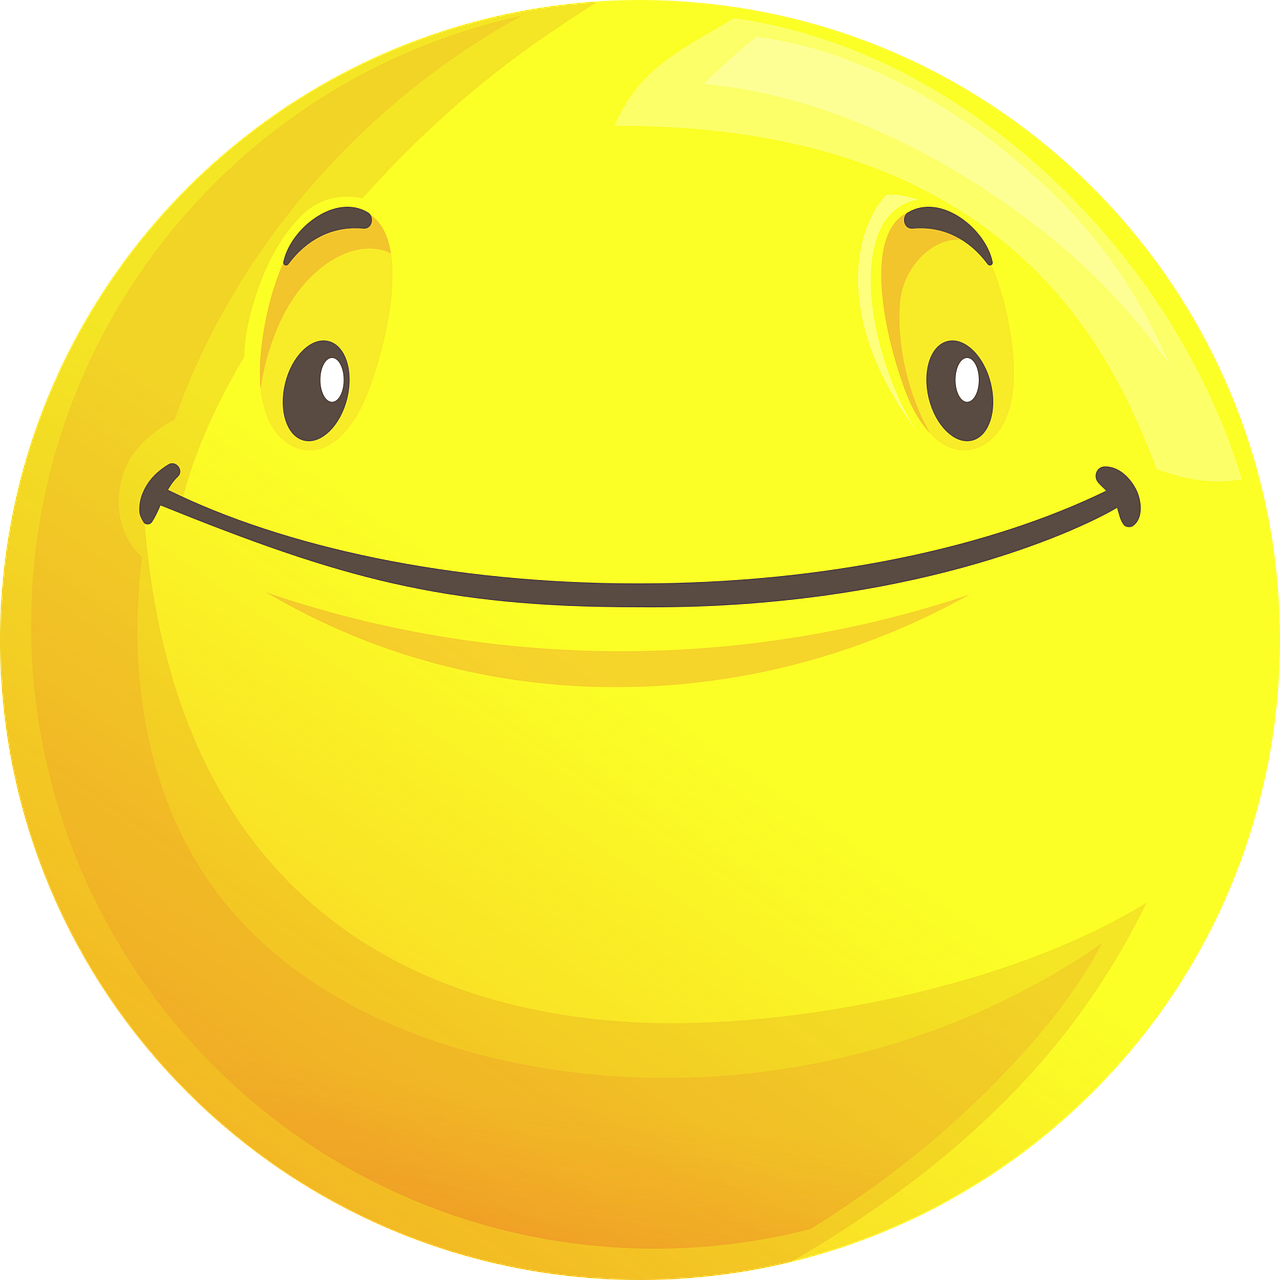 a yellow smiley face on a black background, a digital rendering, inspired by Jim Davis, no gradients, ball, smileeeeeee, transparent face